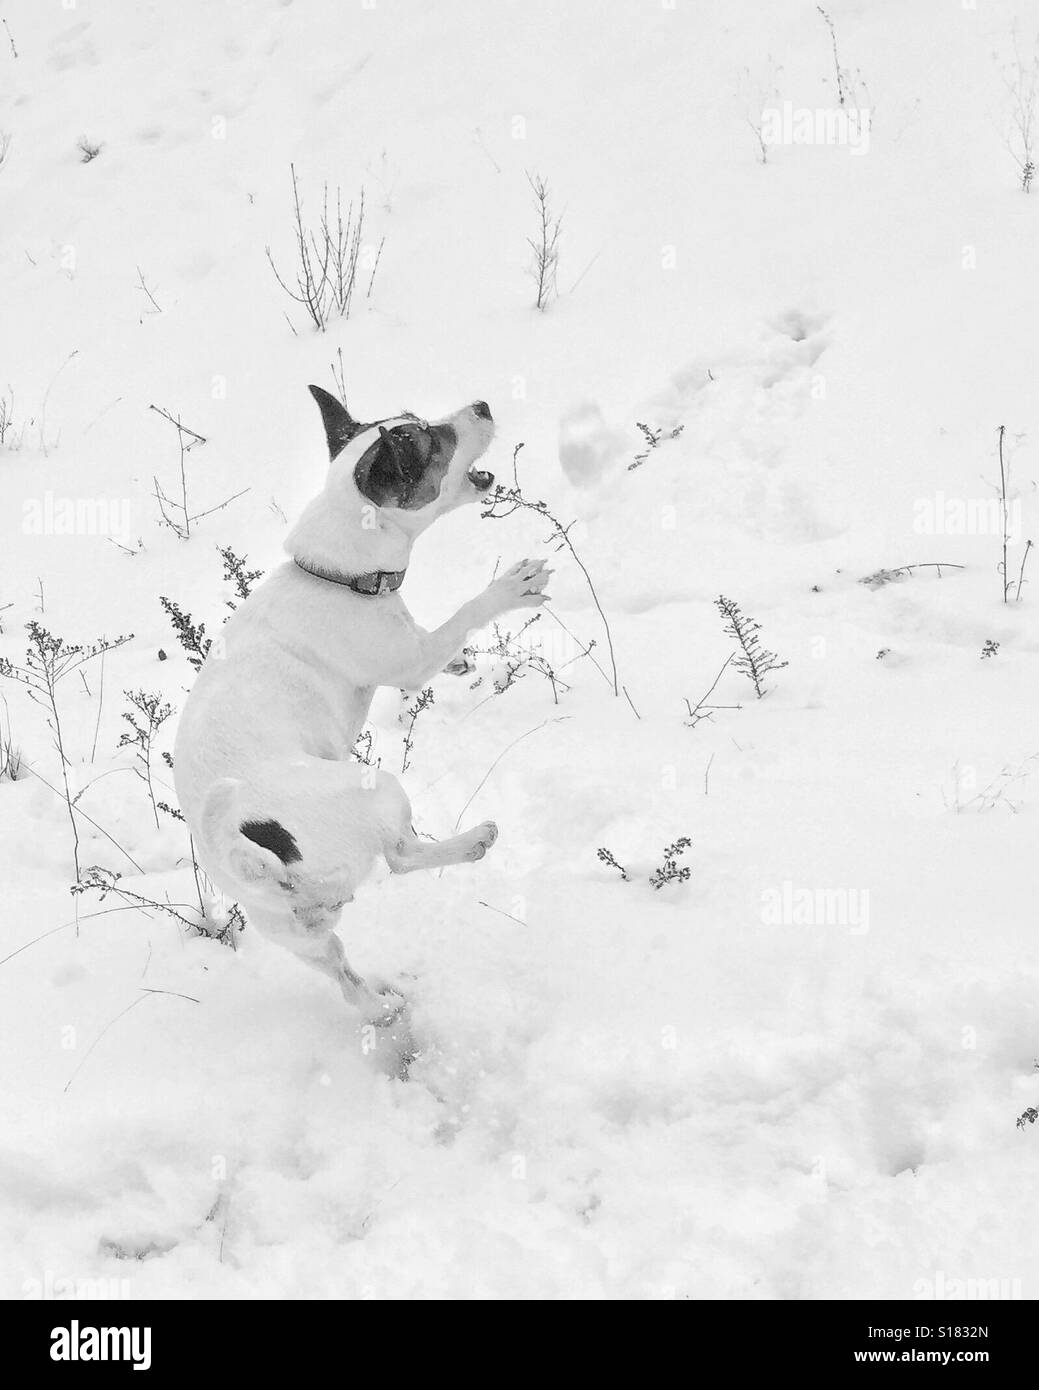 Dog jumping in the air while catching snowballs. Black and white edit ...